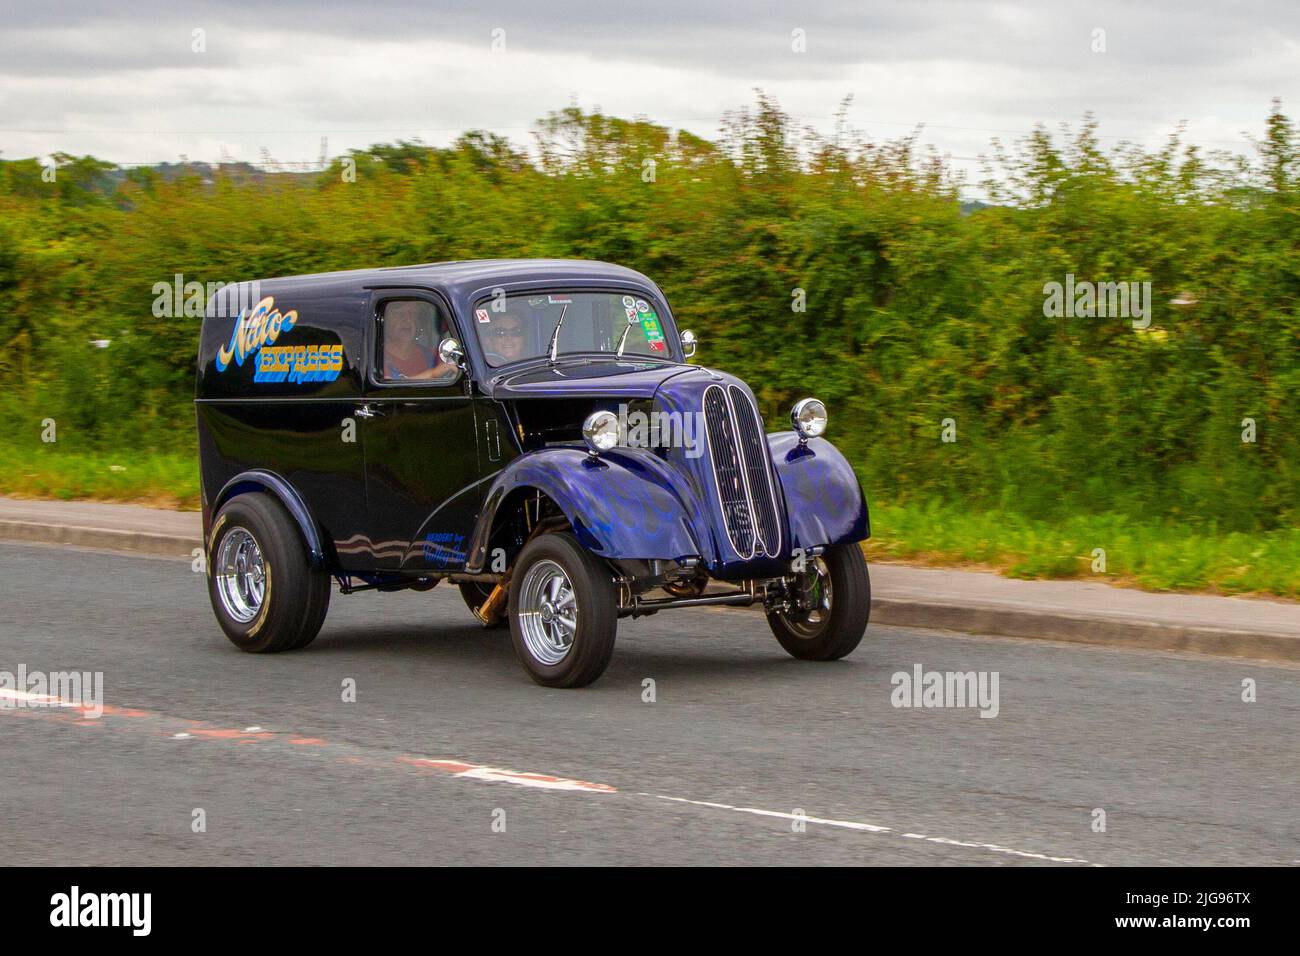 117 Fordson 8 Van (Mod Hot Rod) Van. 1948 40s blue purple forties Ford Anglia 'Nitro Express' based on Fords 5cwt Van. Hot rods cars, drag cars, ANGLIA, hot rod, retro, drag racing, race gasser, street rods. Modified cars en-route to Hoghton Tower for the Supercar Summer Showtime car meet which is organised by Great British Motor Shows in Preston, UK Stock Photo